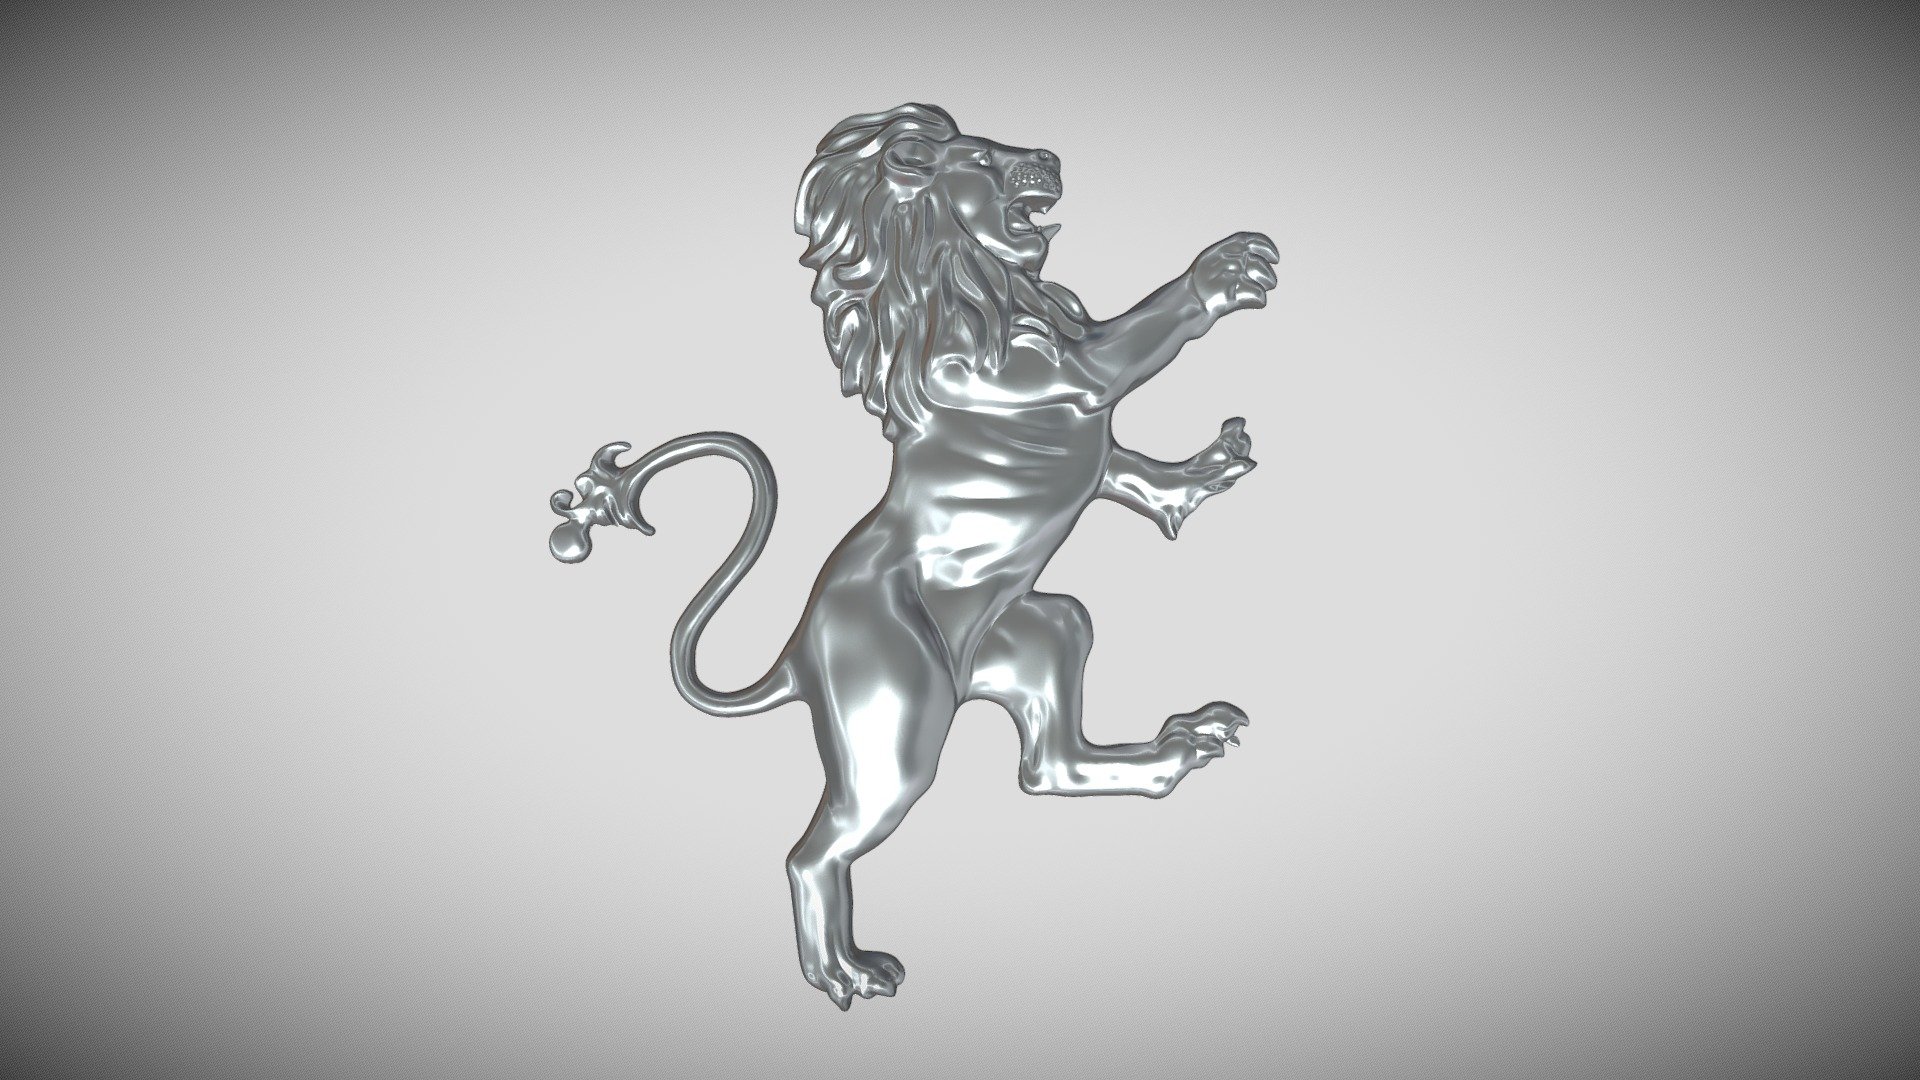 Printable heraldic lion.

Could be used for jewelry (medalion, pendant or ring).

Weights in different metals (g):

Silver  19.95

10K Gold    21.85

14K Gold    25.65

18K Gold    29.45

Platinum    38.19

Palladium   22.84

Approximate dimensions - 43 x 53 x 5.5 mm - Heraldic Lion - Buy Royalty Free 3D model by KDesigns 3d model